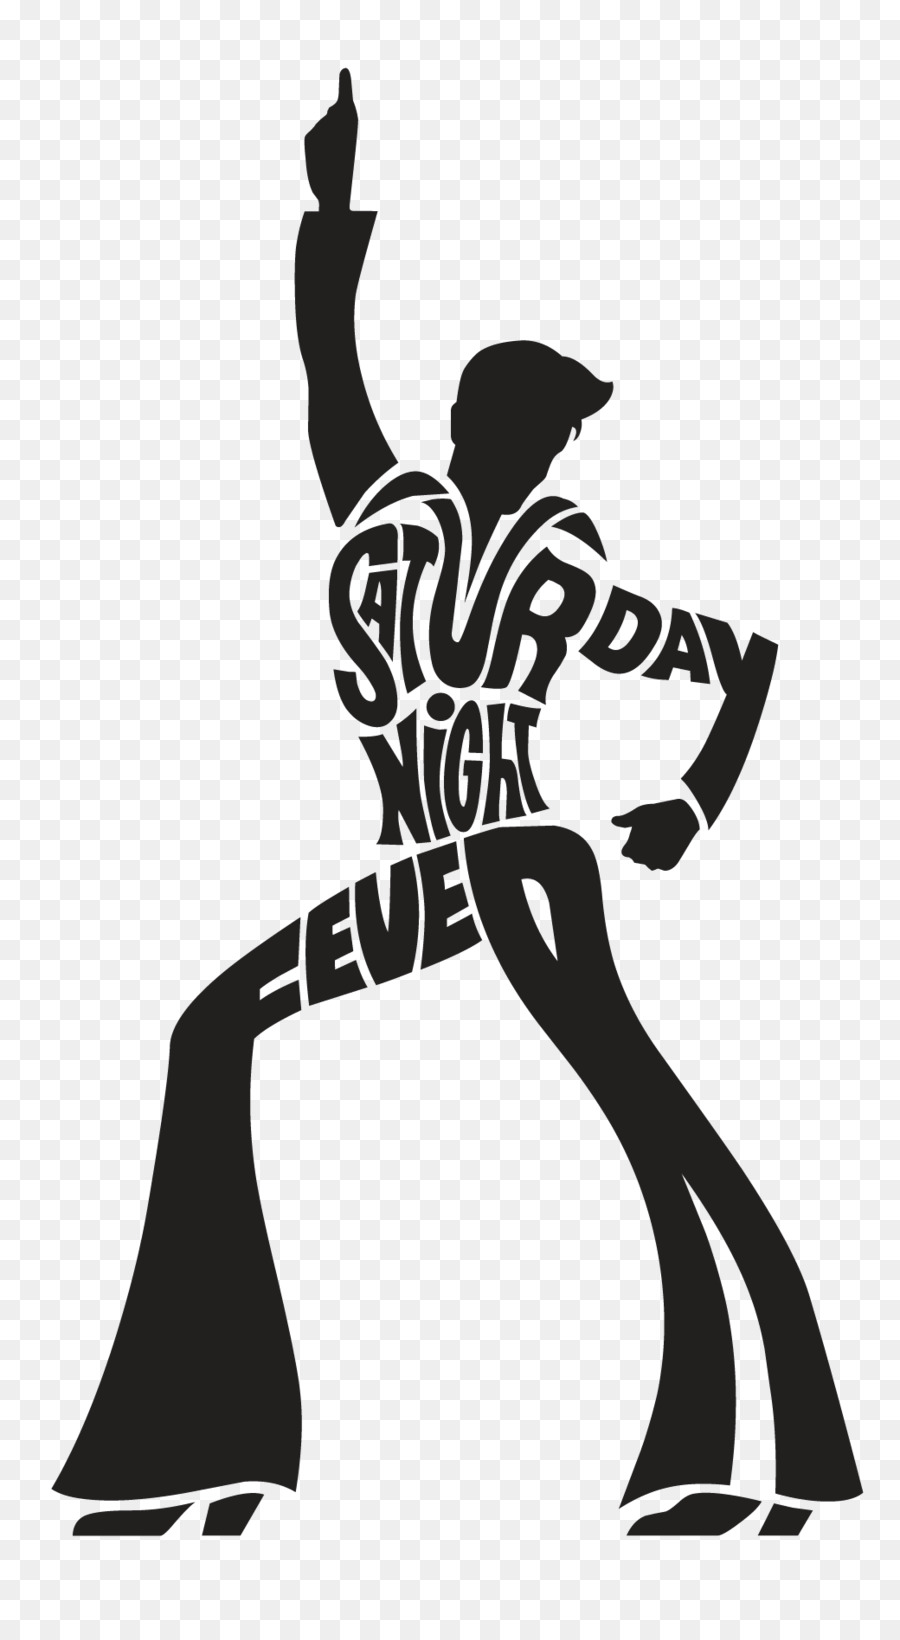 Silhouette Saturday Night Fever Vector graphics Disco - Silhouette png download - 1040*1881 - Free Transparent Silhouette png Download.